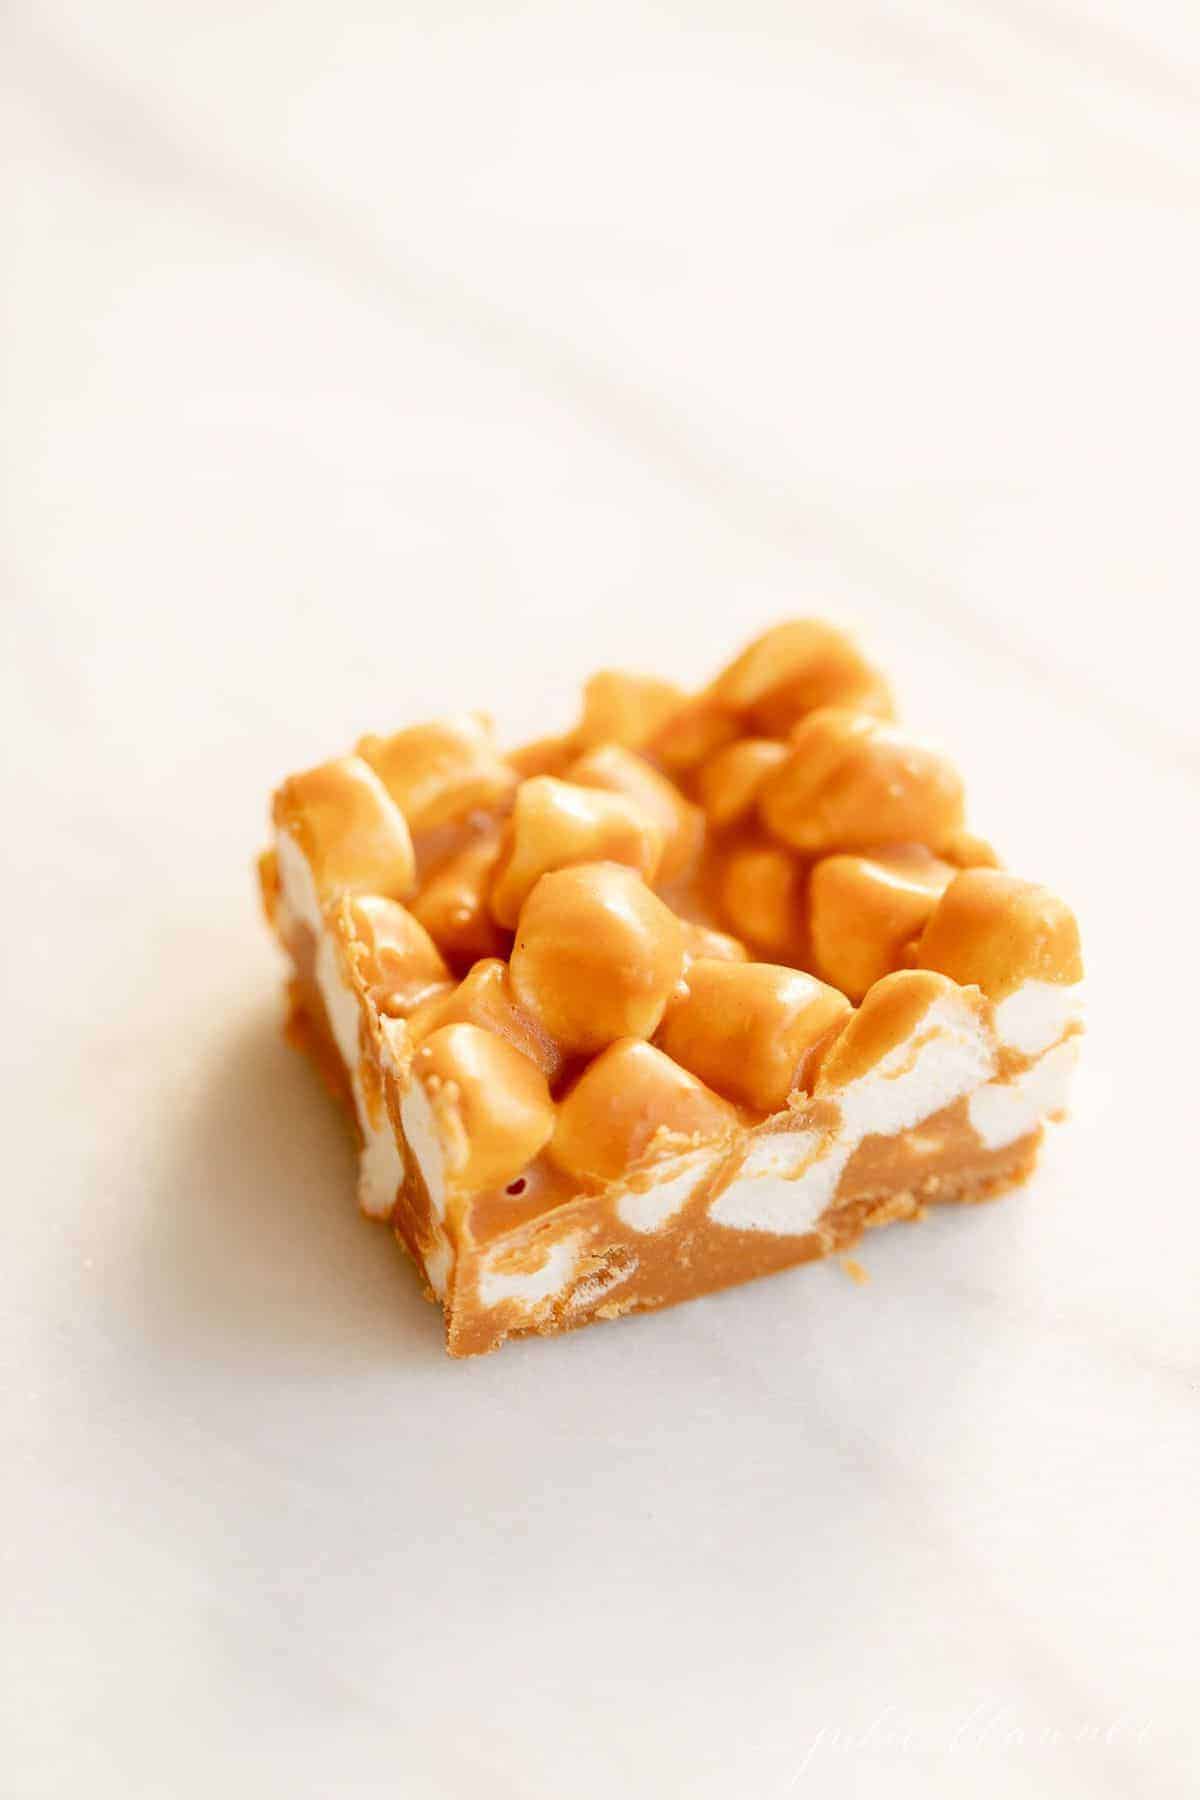 Single bar of butterscotch squares on a marble surface.